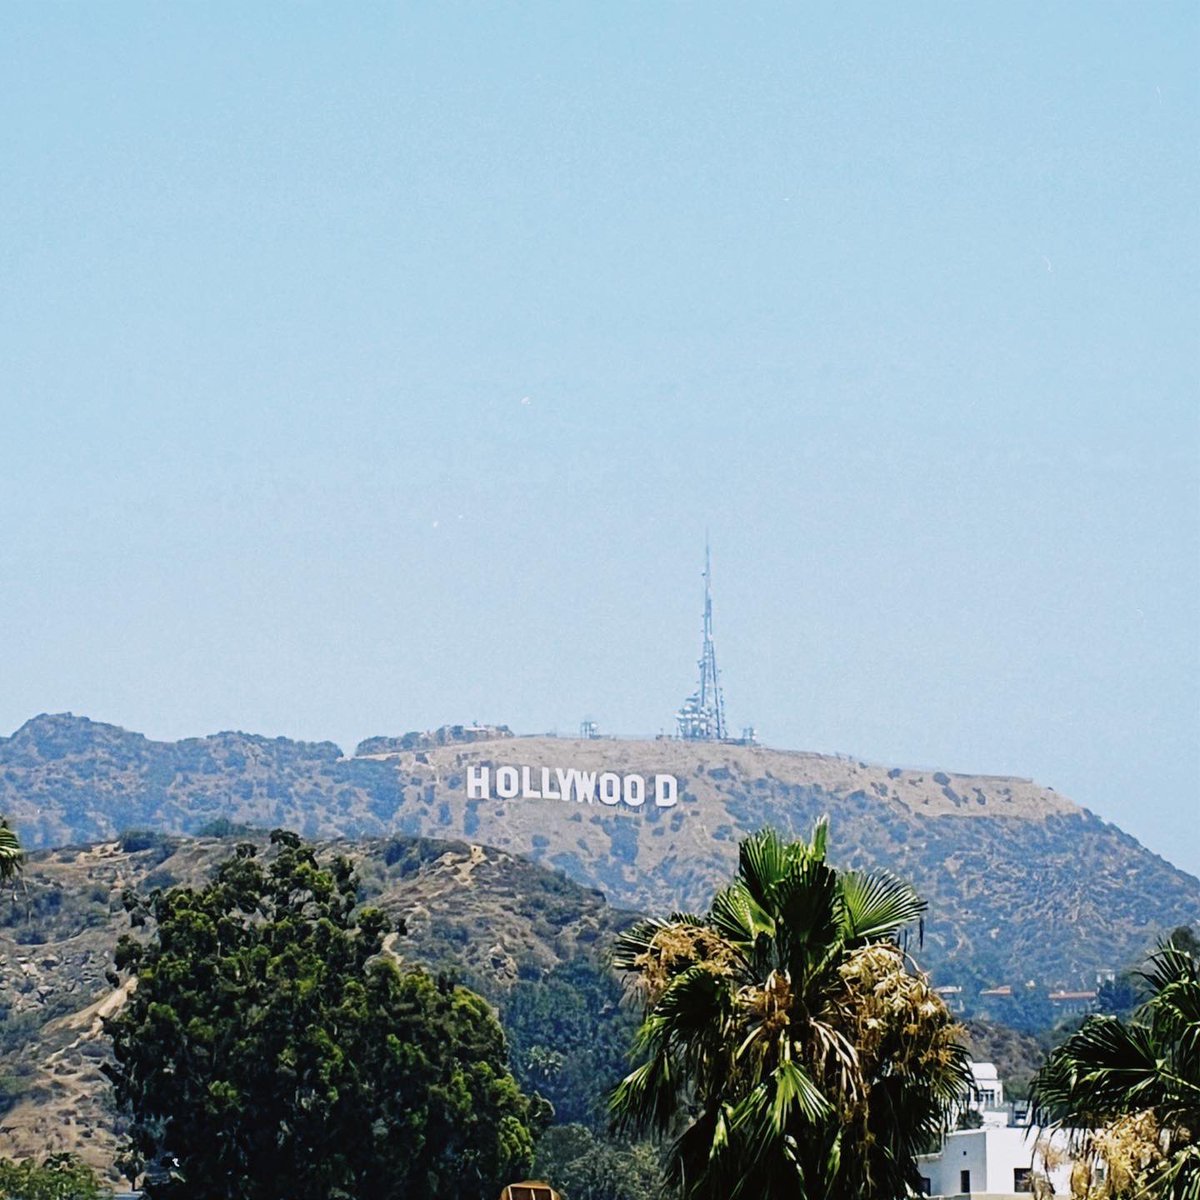 Every time I come here I'm so shocked at the confidence boost you get from being in a big city compared to a lil place where if you stand out it's a negative. Never feel hotter than when I'm in LA. God bless America lol 🇺🇸🌴☀️